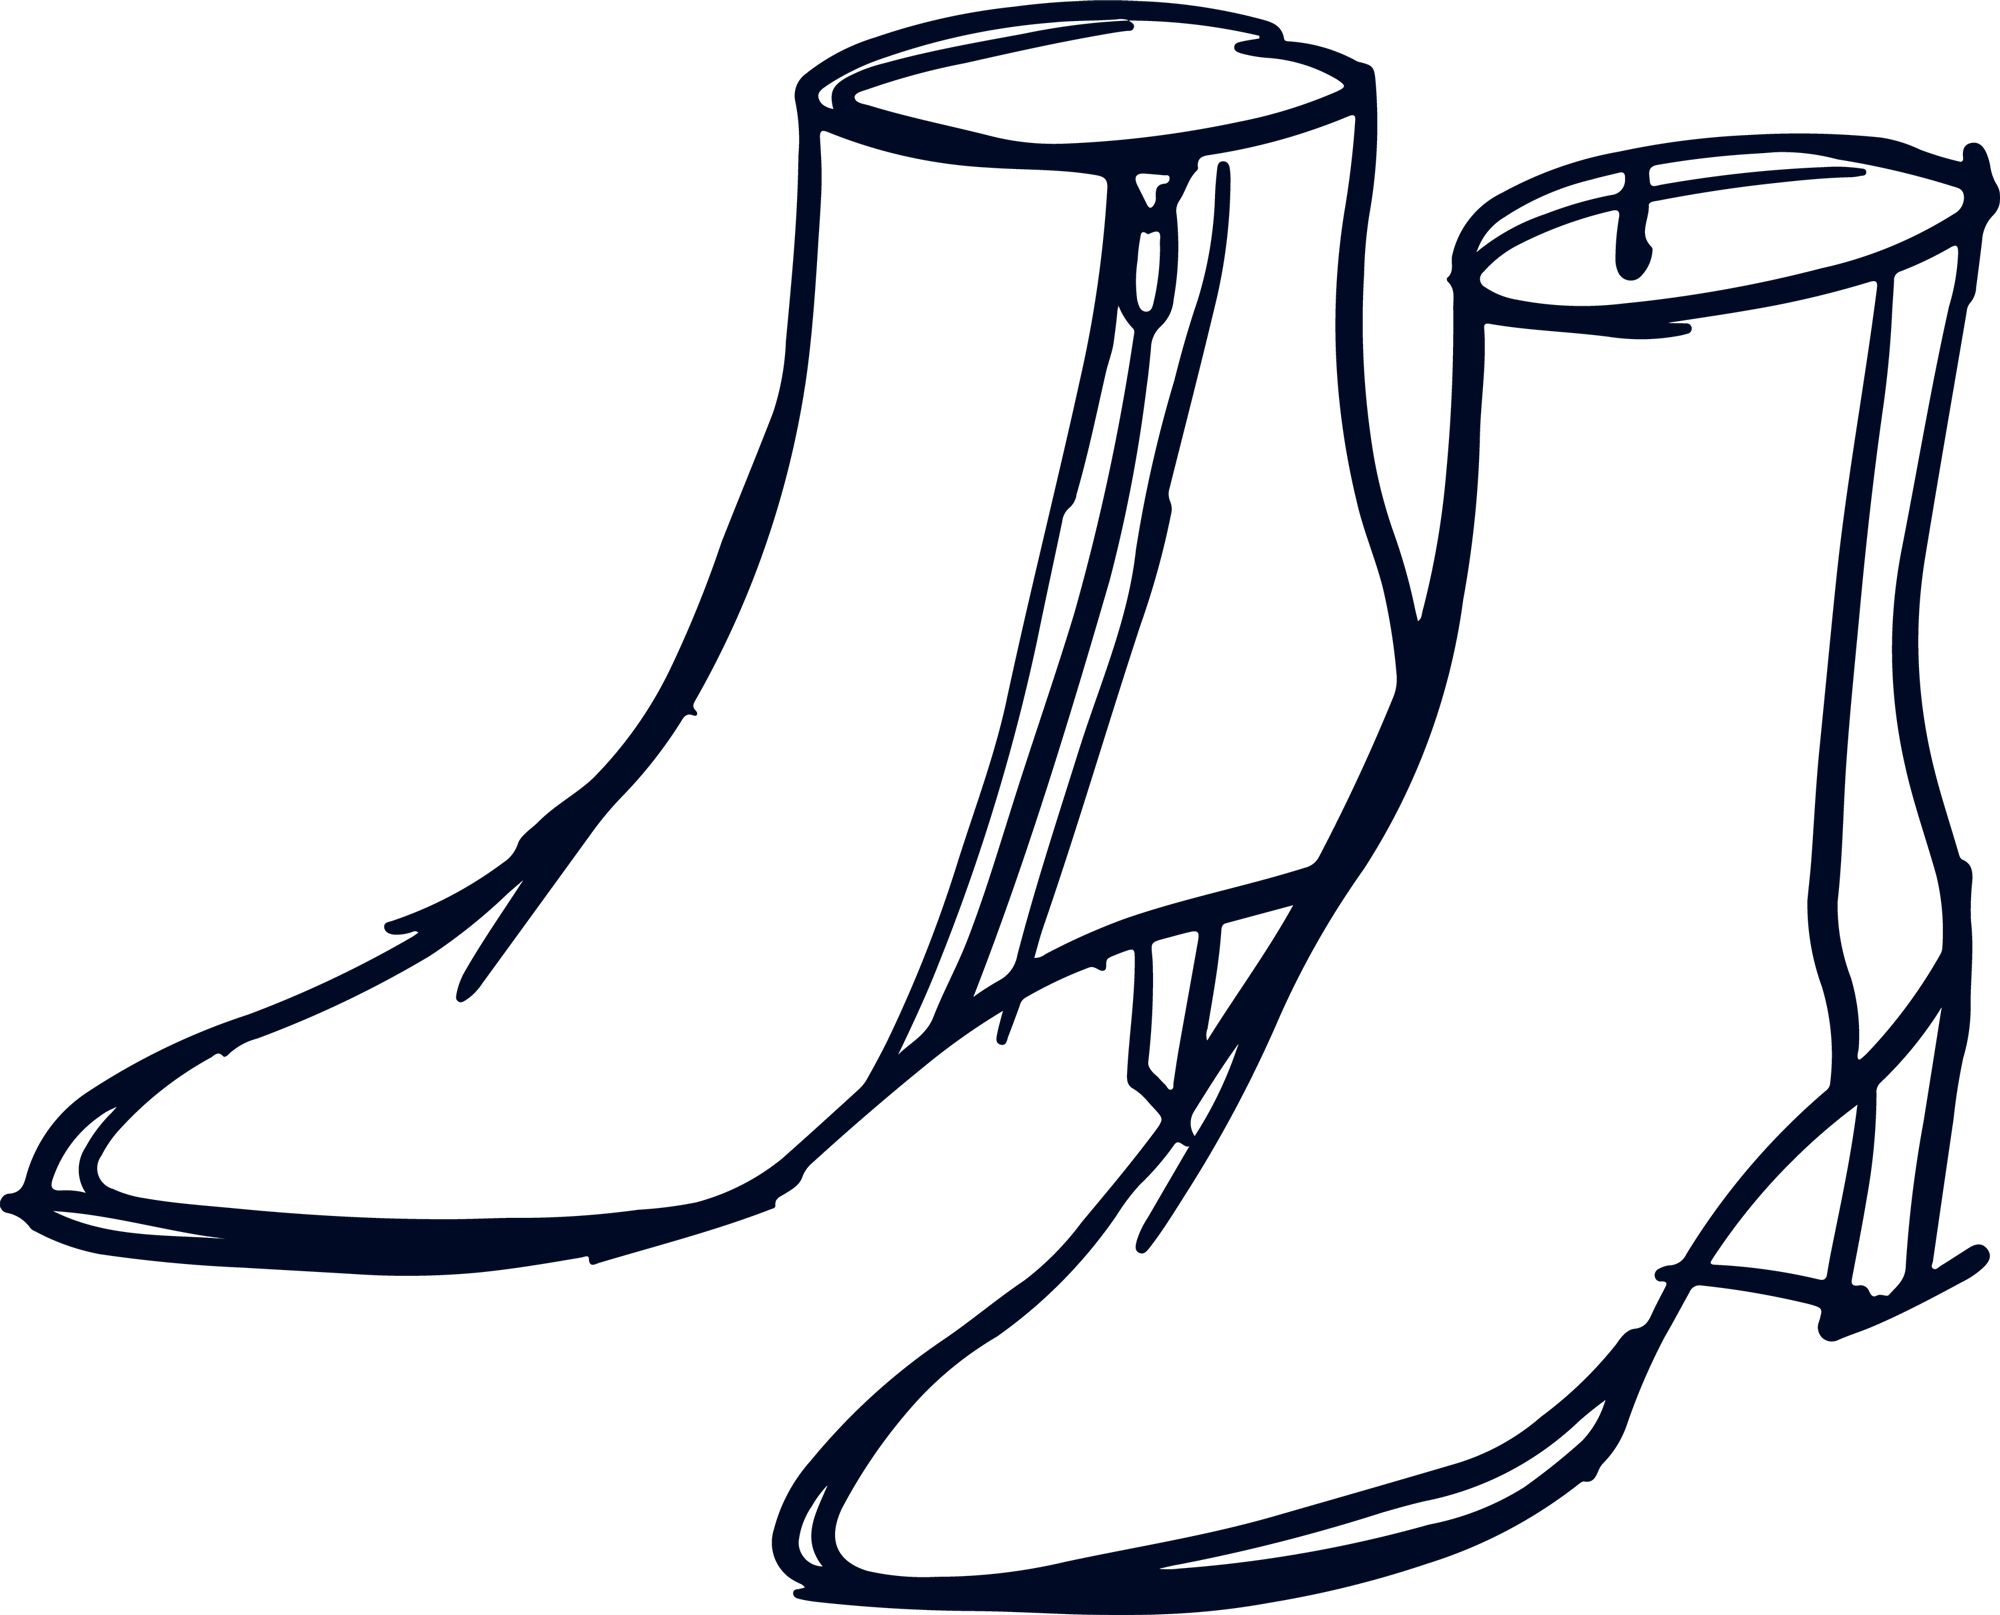 Animated GIF, featuring rough sketches of different shoe styles